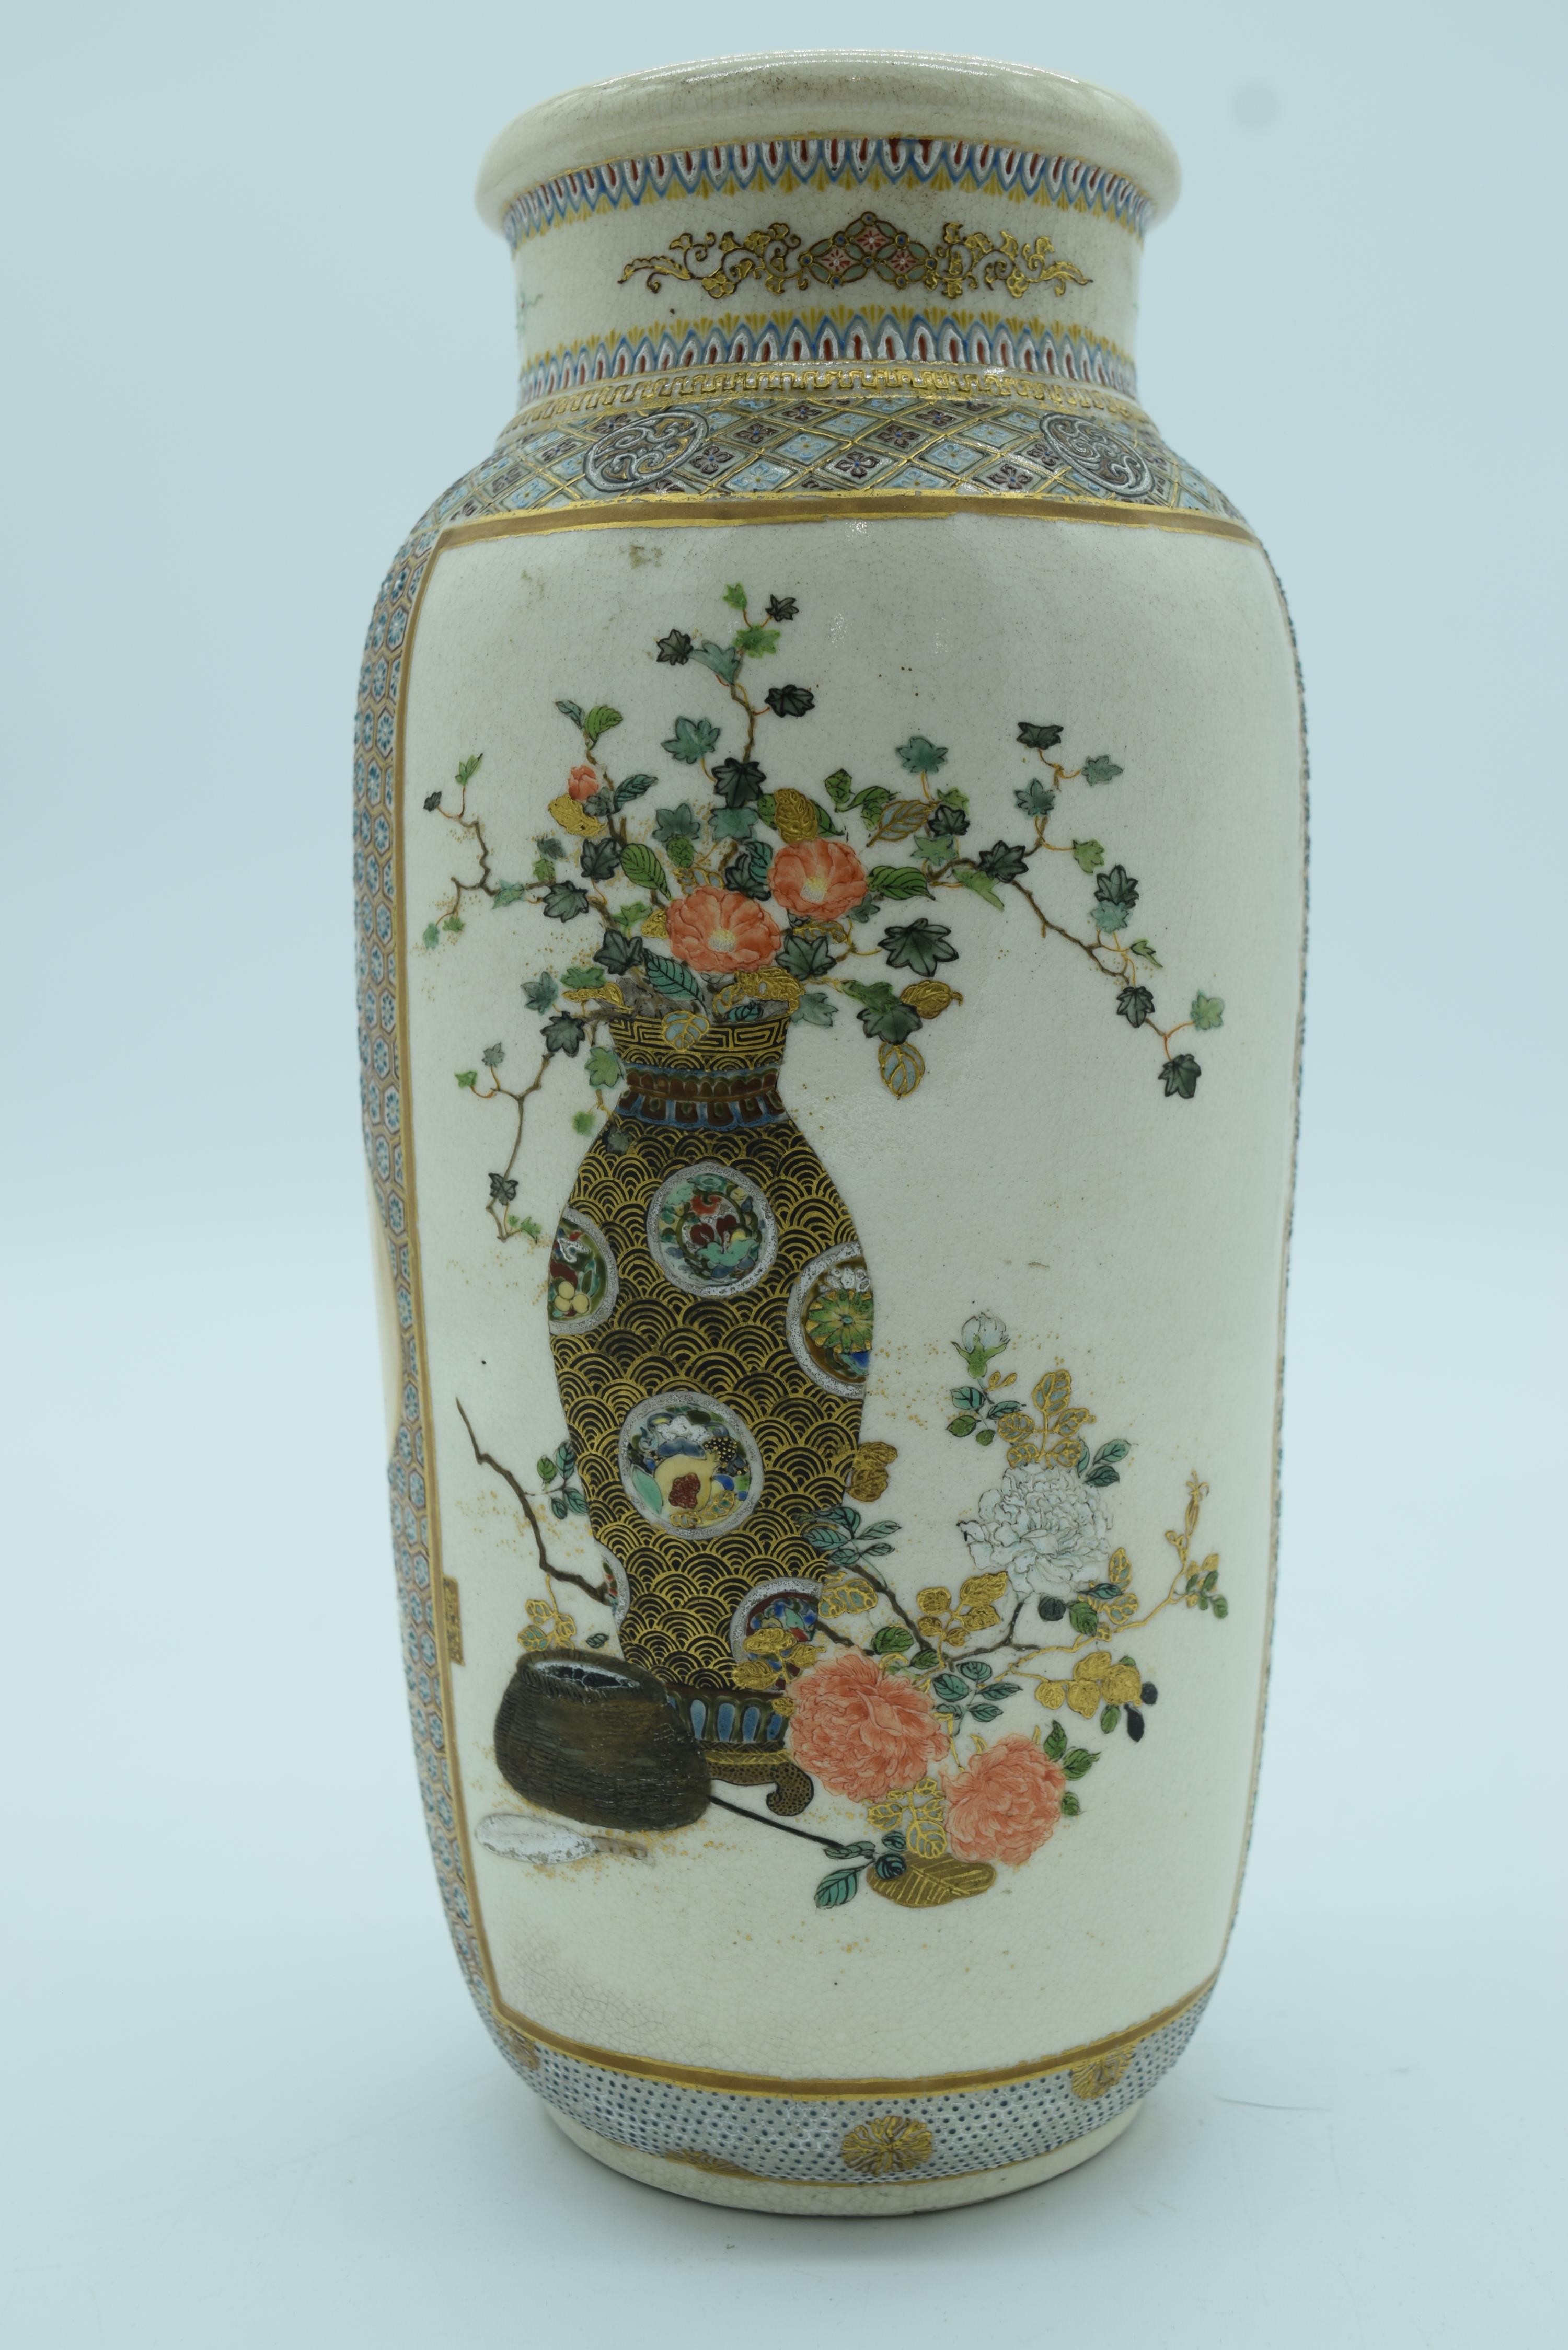 A PAIR OF 19TH CENTURY JAPANESE MEIJI PERIOD SATSUMA VASES painted with bonzai trees and high tables - Image 8 of 19